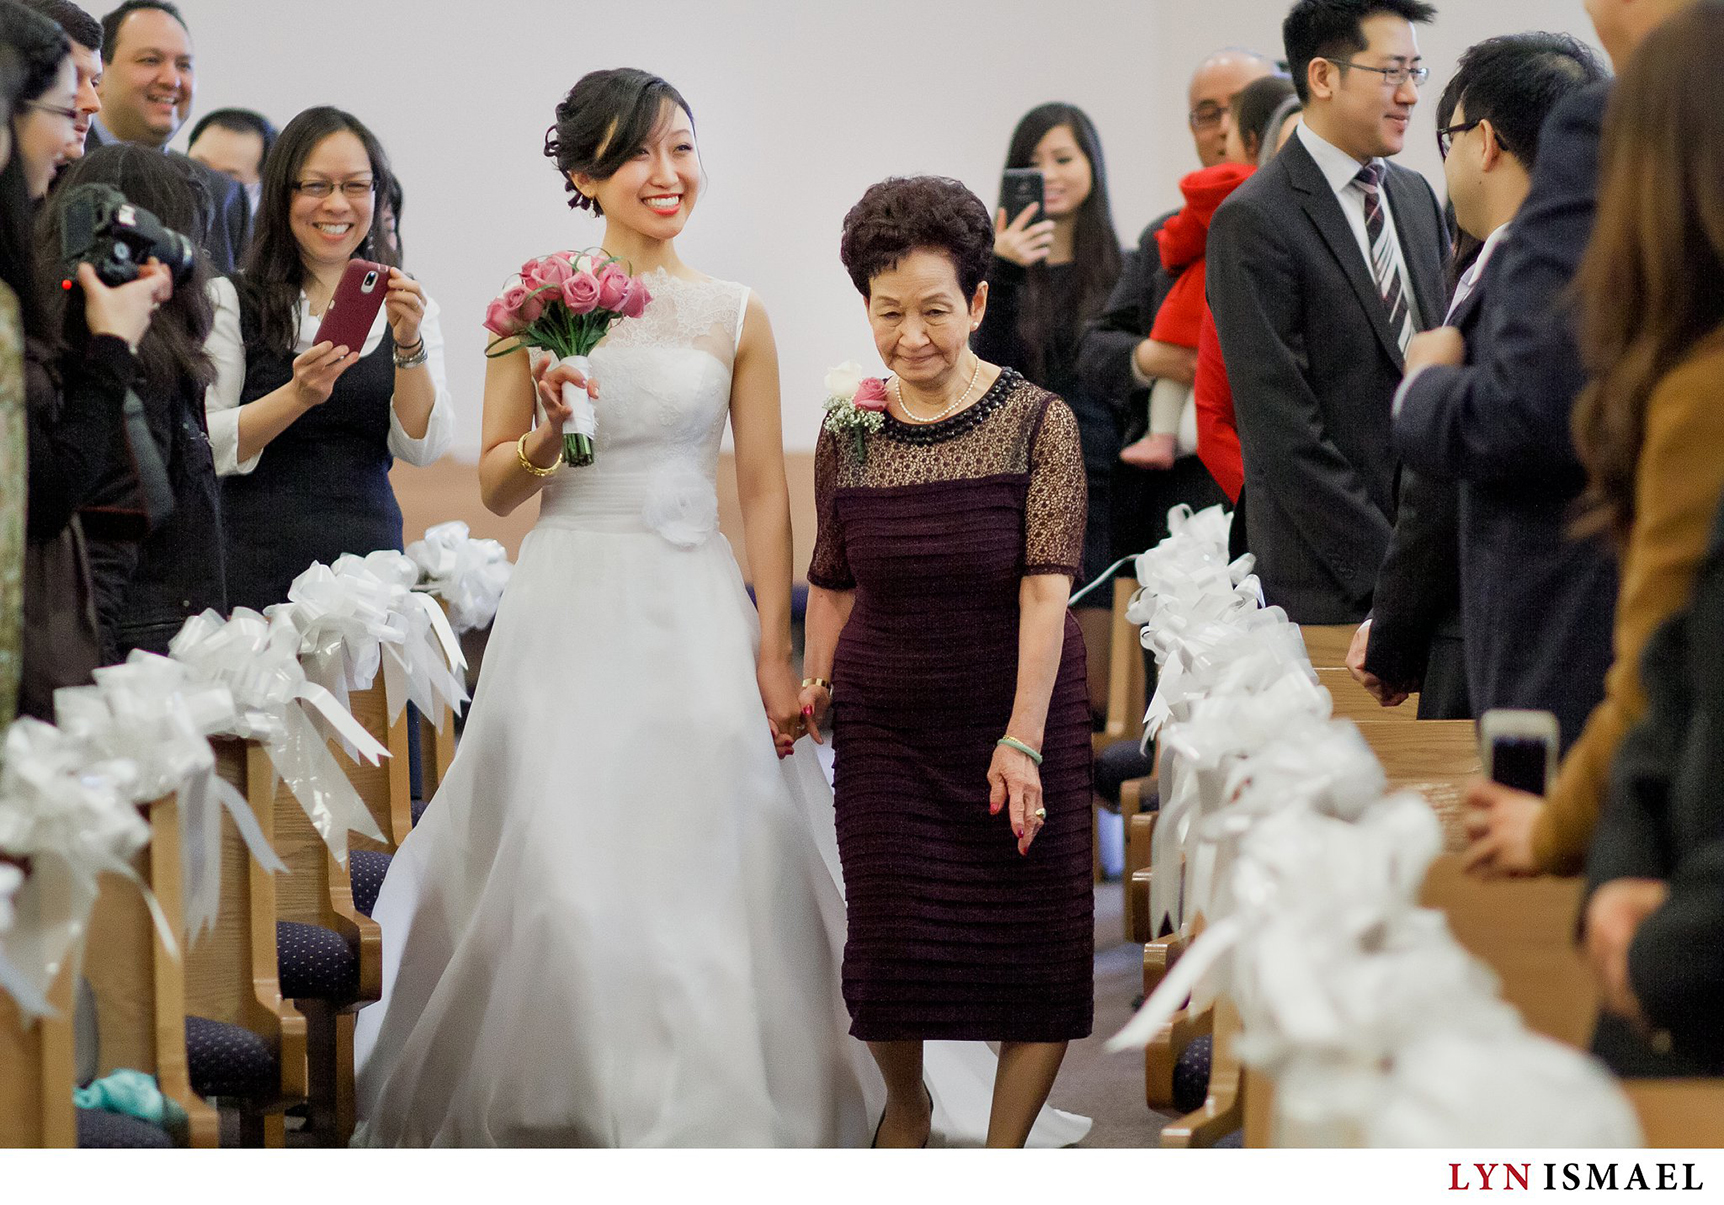 Bride walks down the isle with her grandmother.